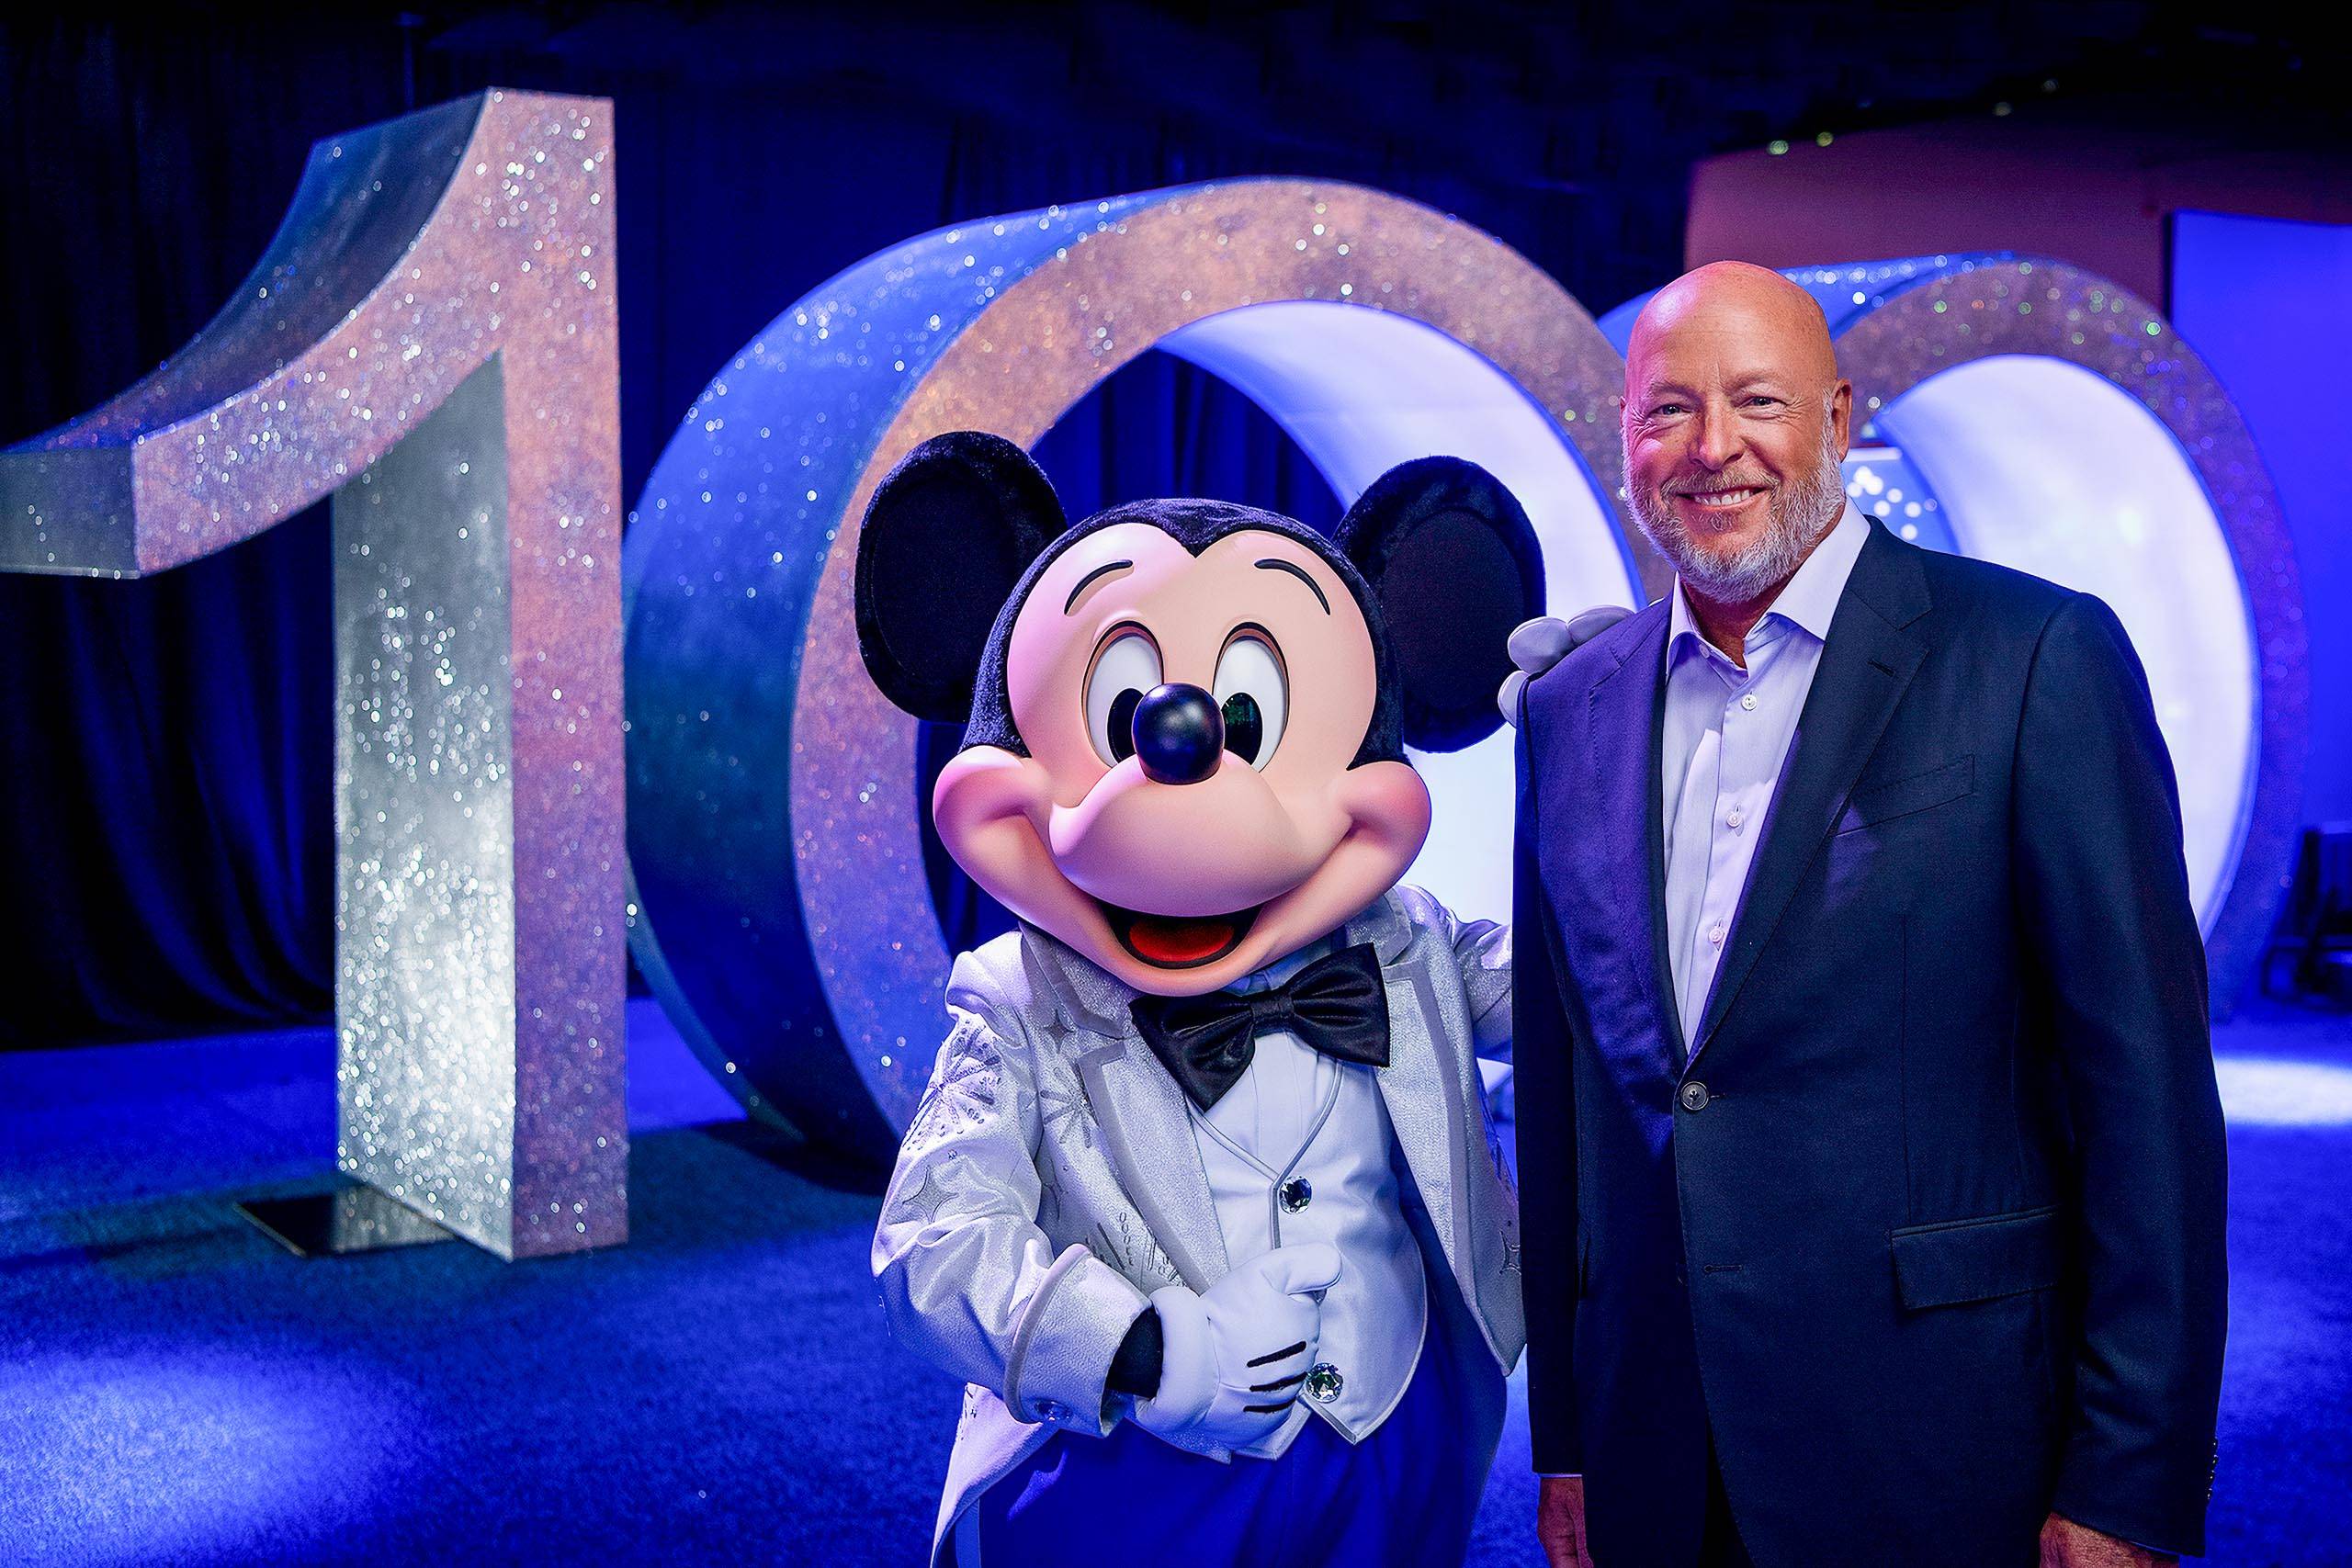 Disney CEO Bob Chapek and Mickey Mouse in his shimmering new "platinum" outfit